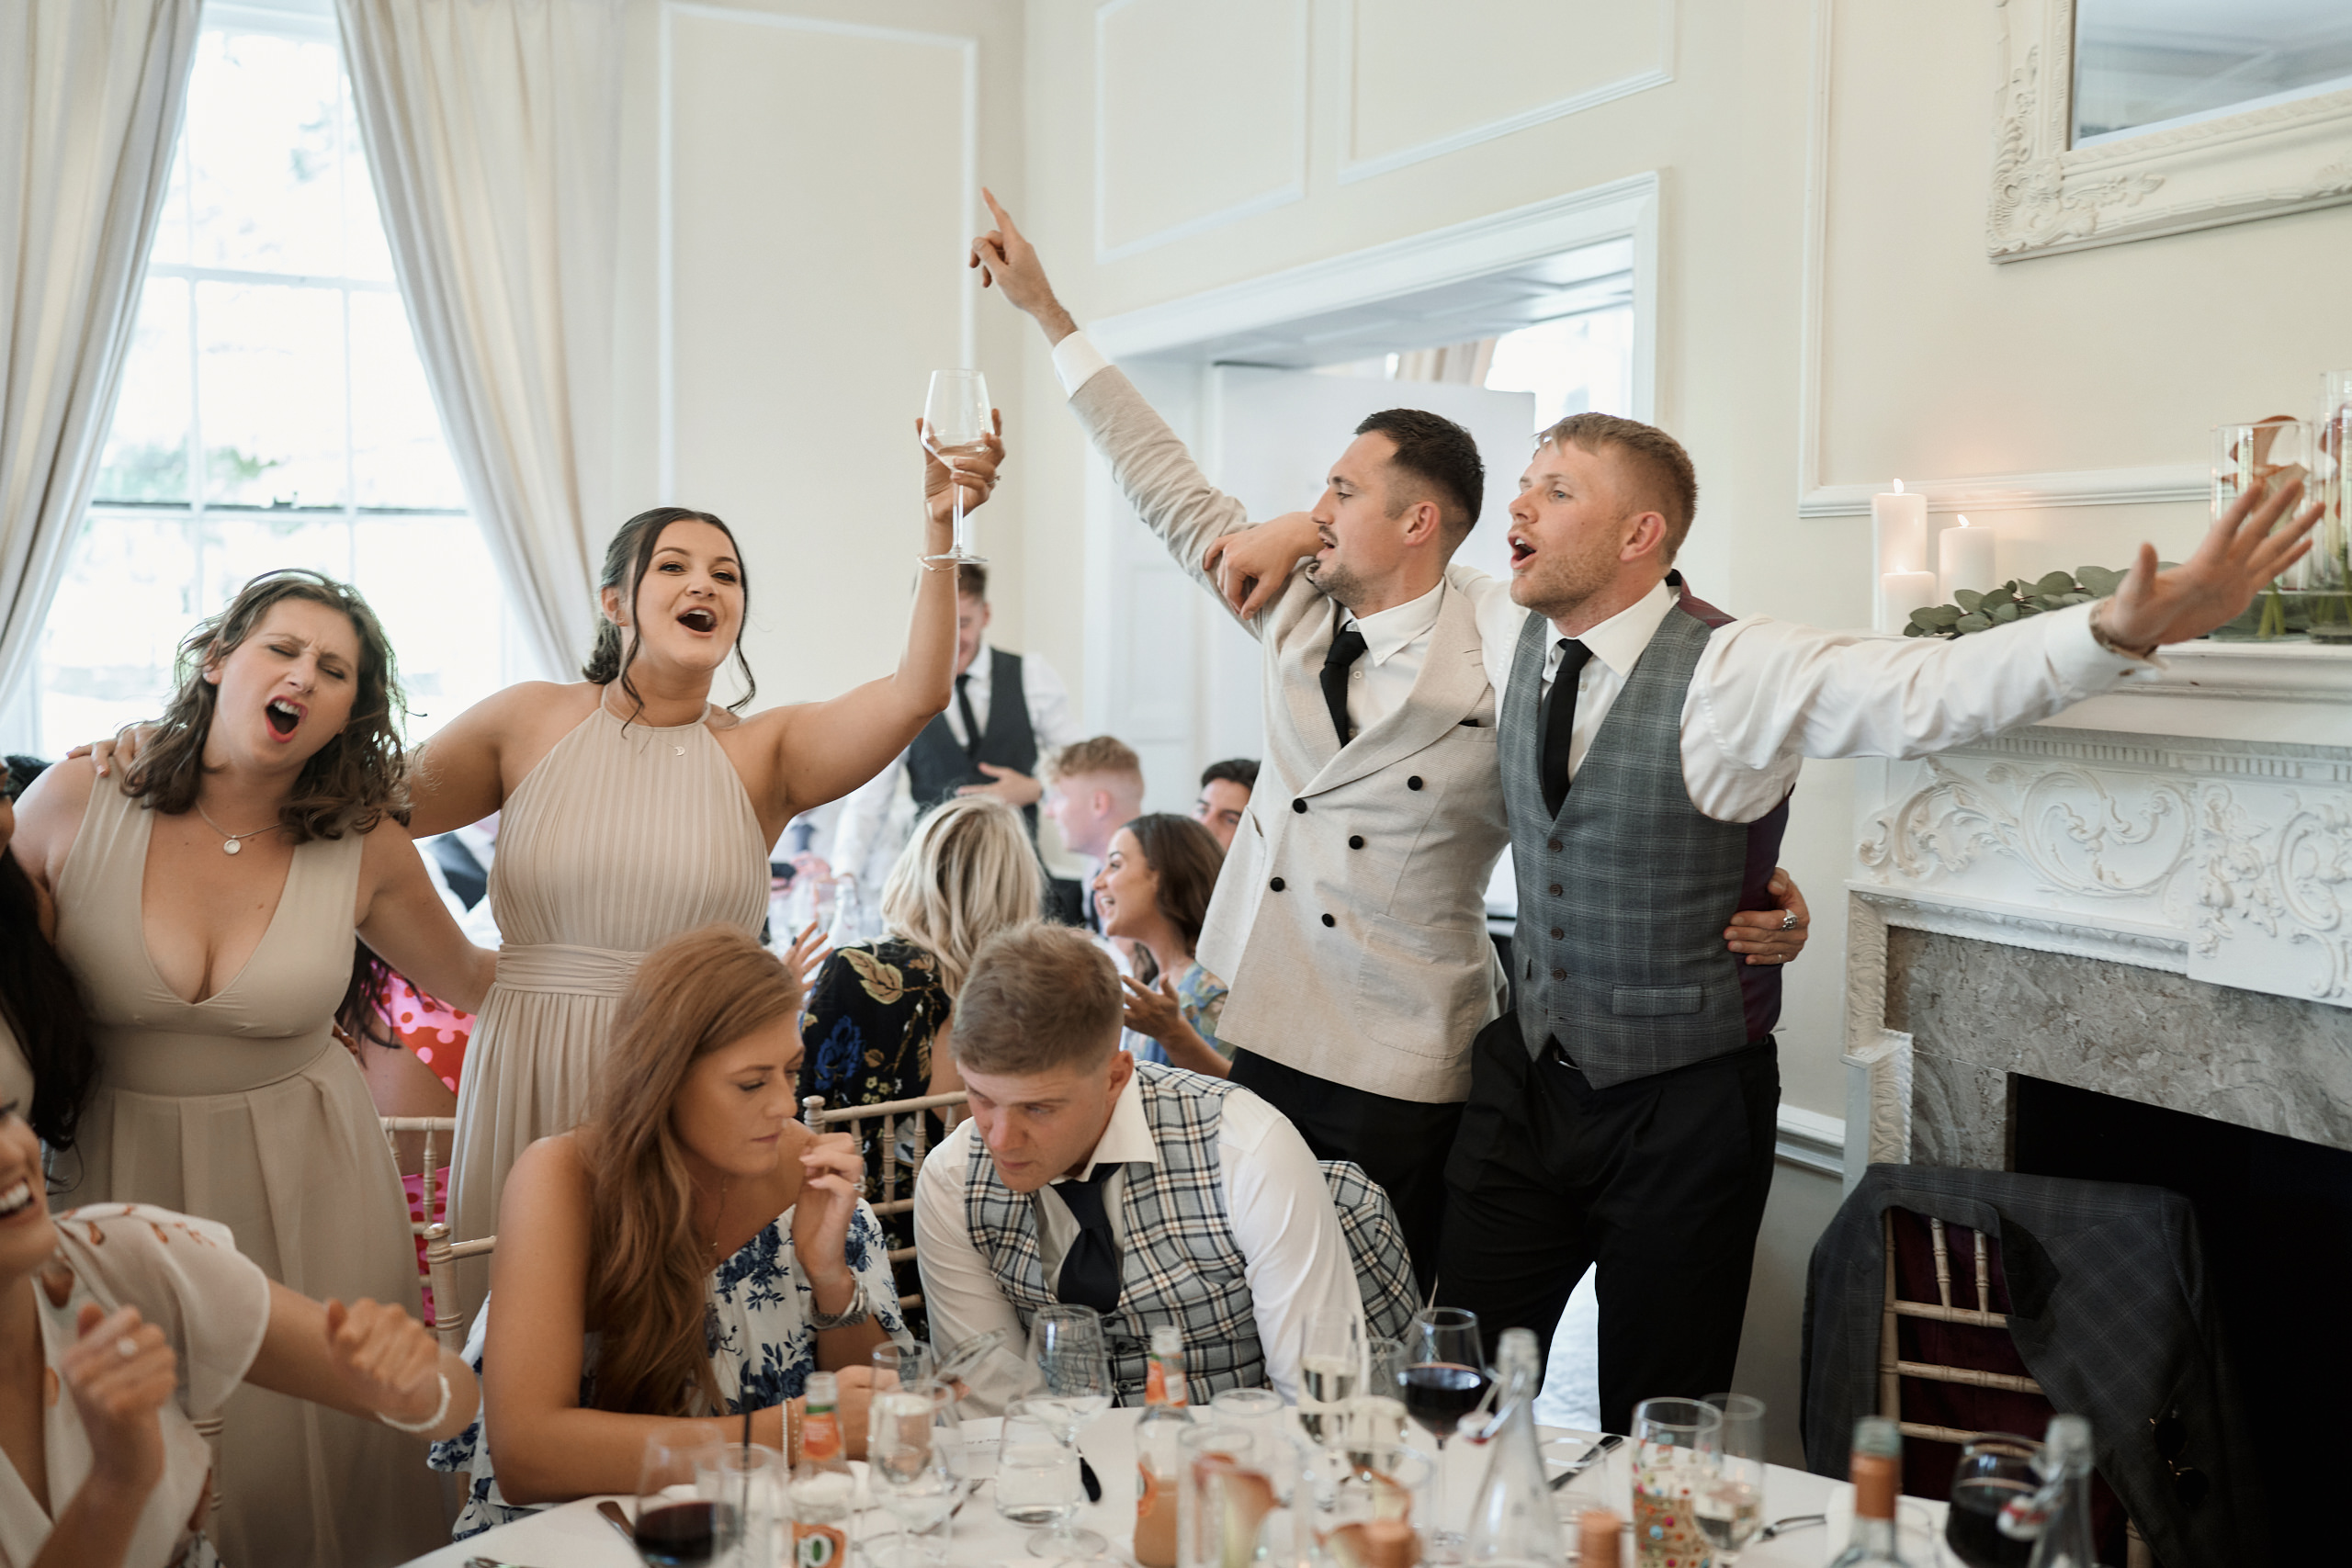 A group of people celebrating at a wedding reception.